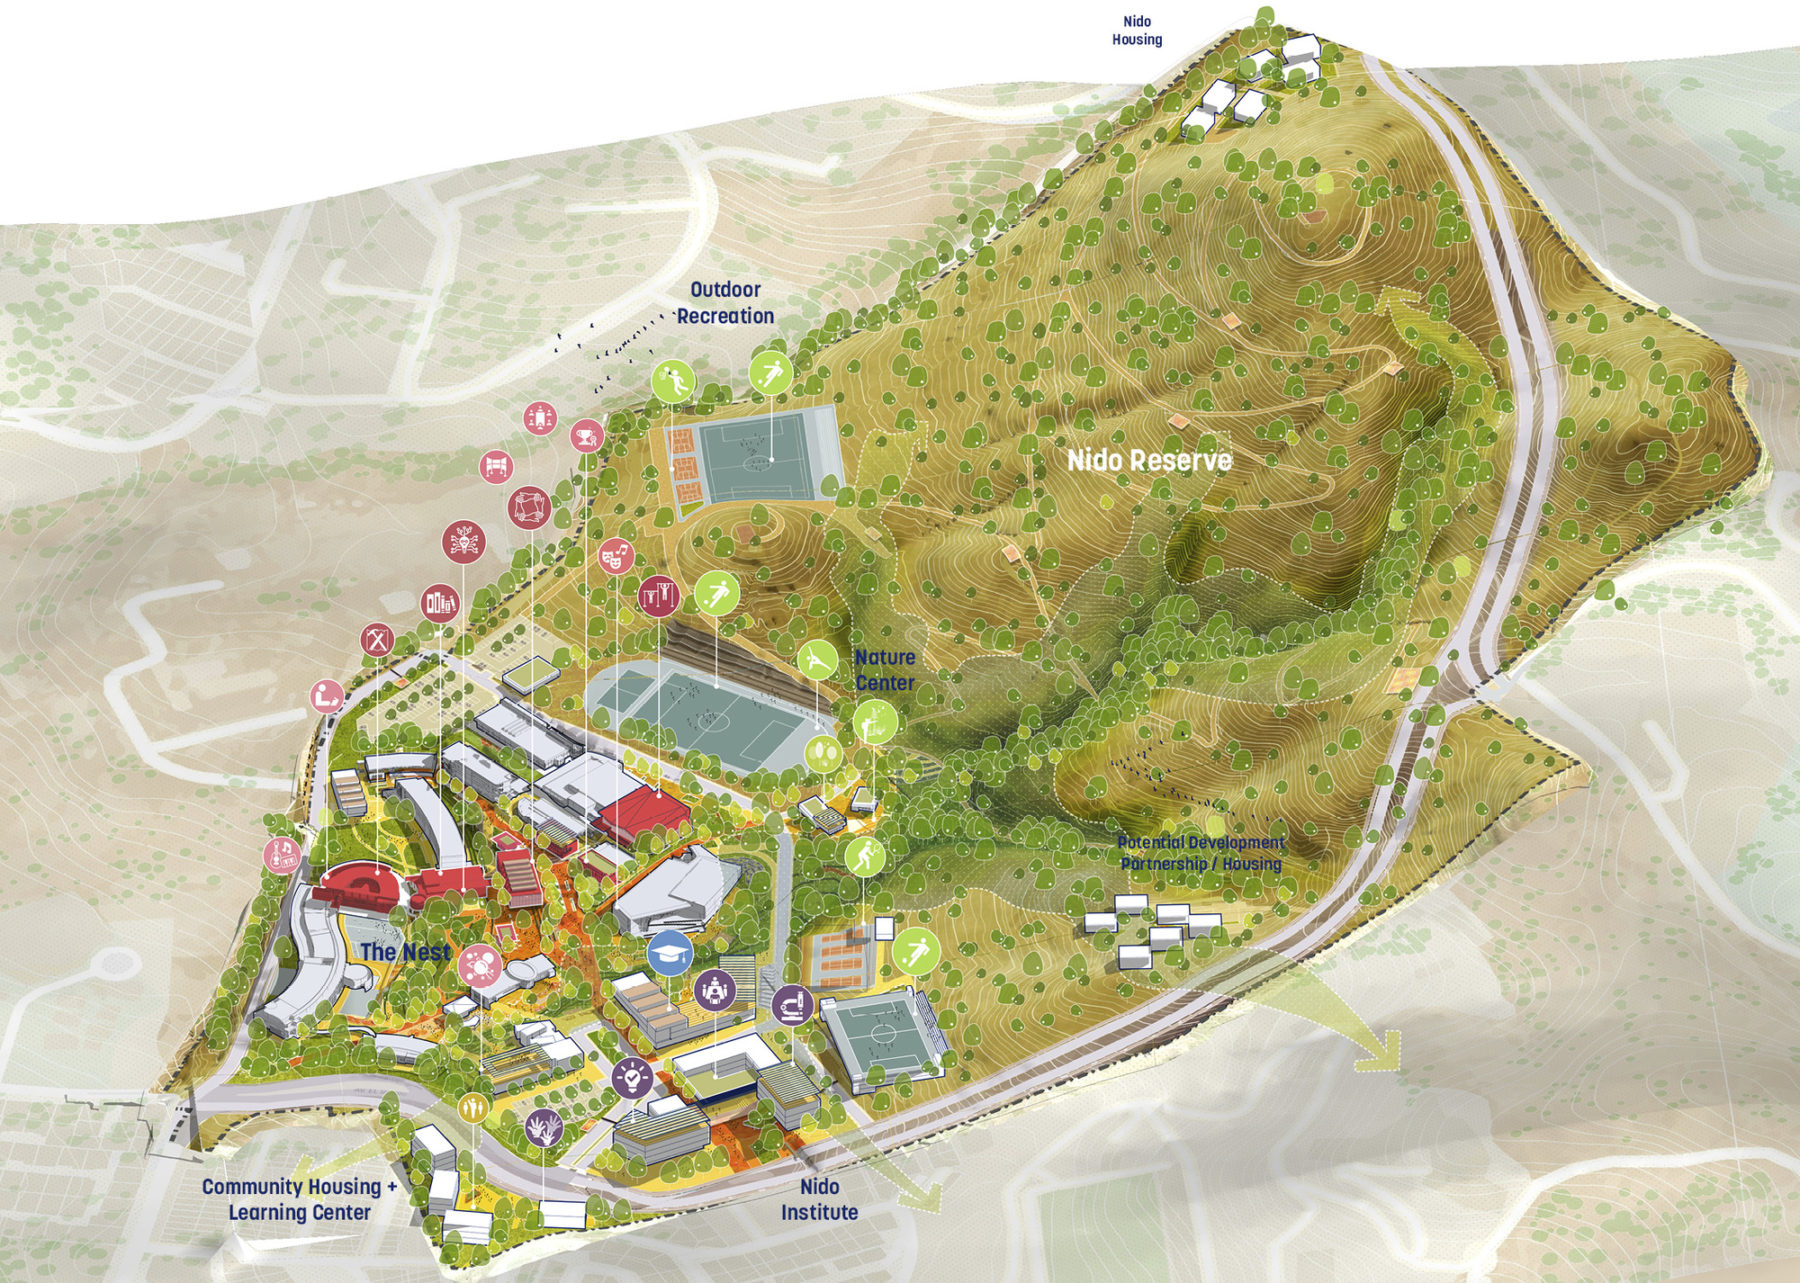 aerial axon drawing of campus vision. Major venues are labeled and icons show program distribution.